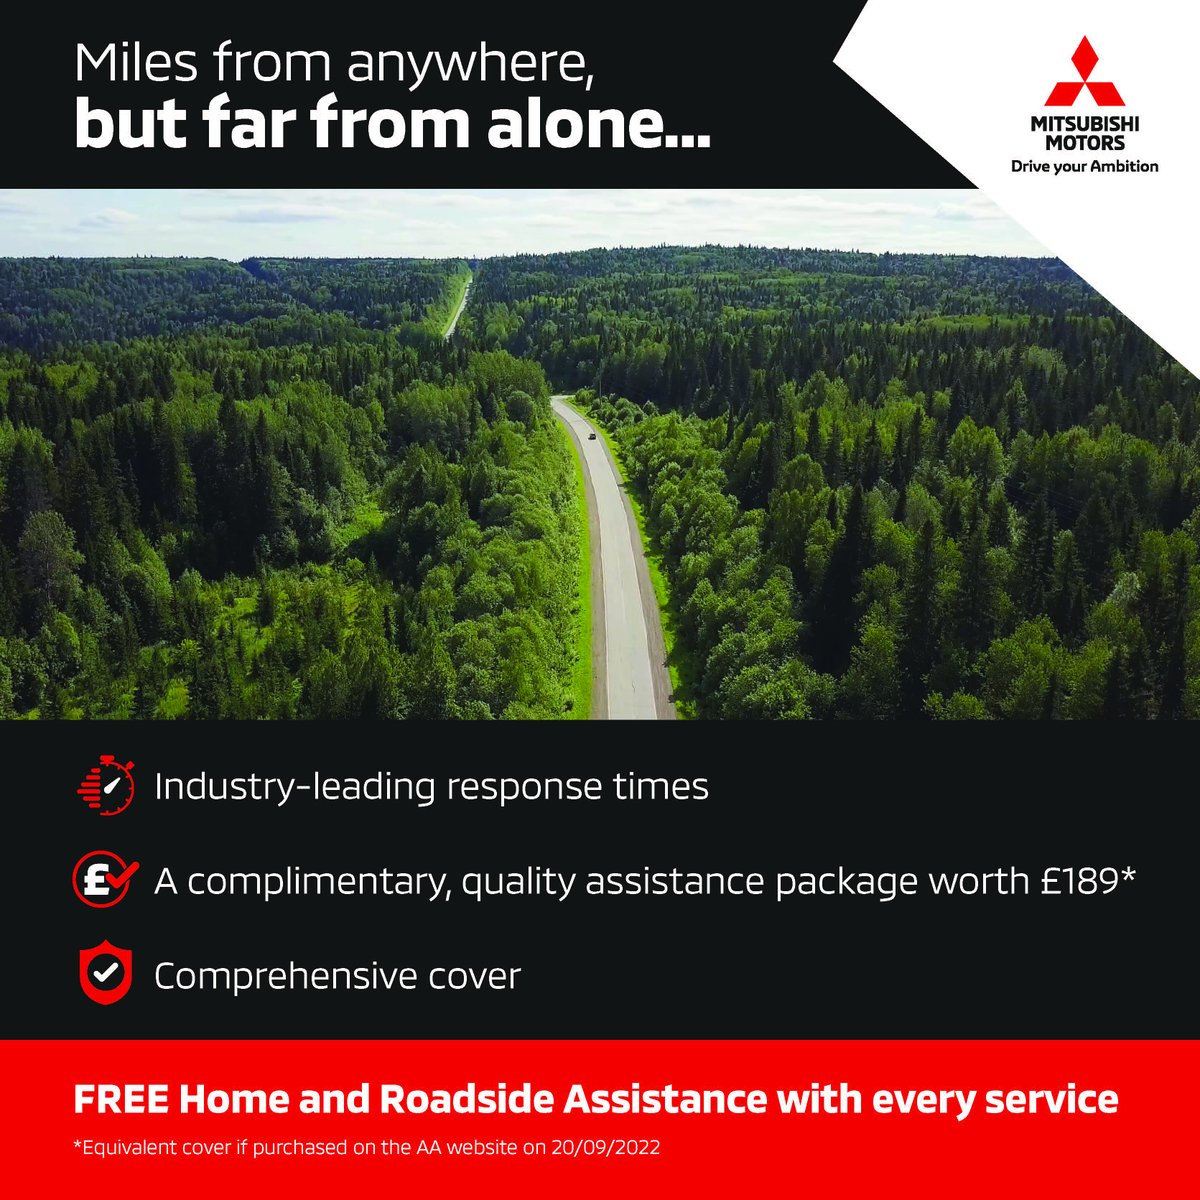 With Mitsubishi, you'll receive FREE home and roadside assistance with every service. Why go anywhere else? mitsubishi-motors.co.uk/roadside-assis… *At participating Servicing Centres only. #Mitsubishi #MitsubishiMotors #MitsubishiMotorsUK